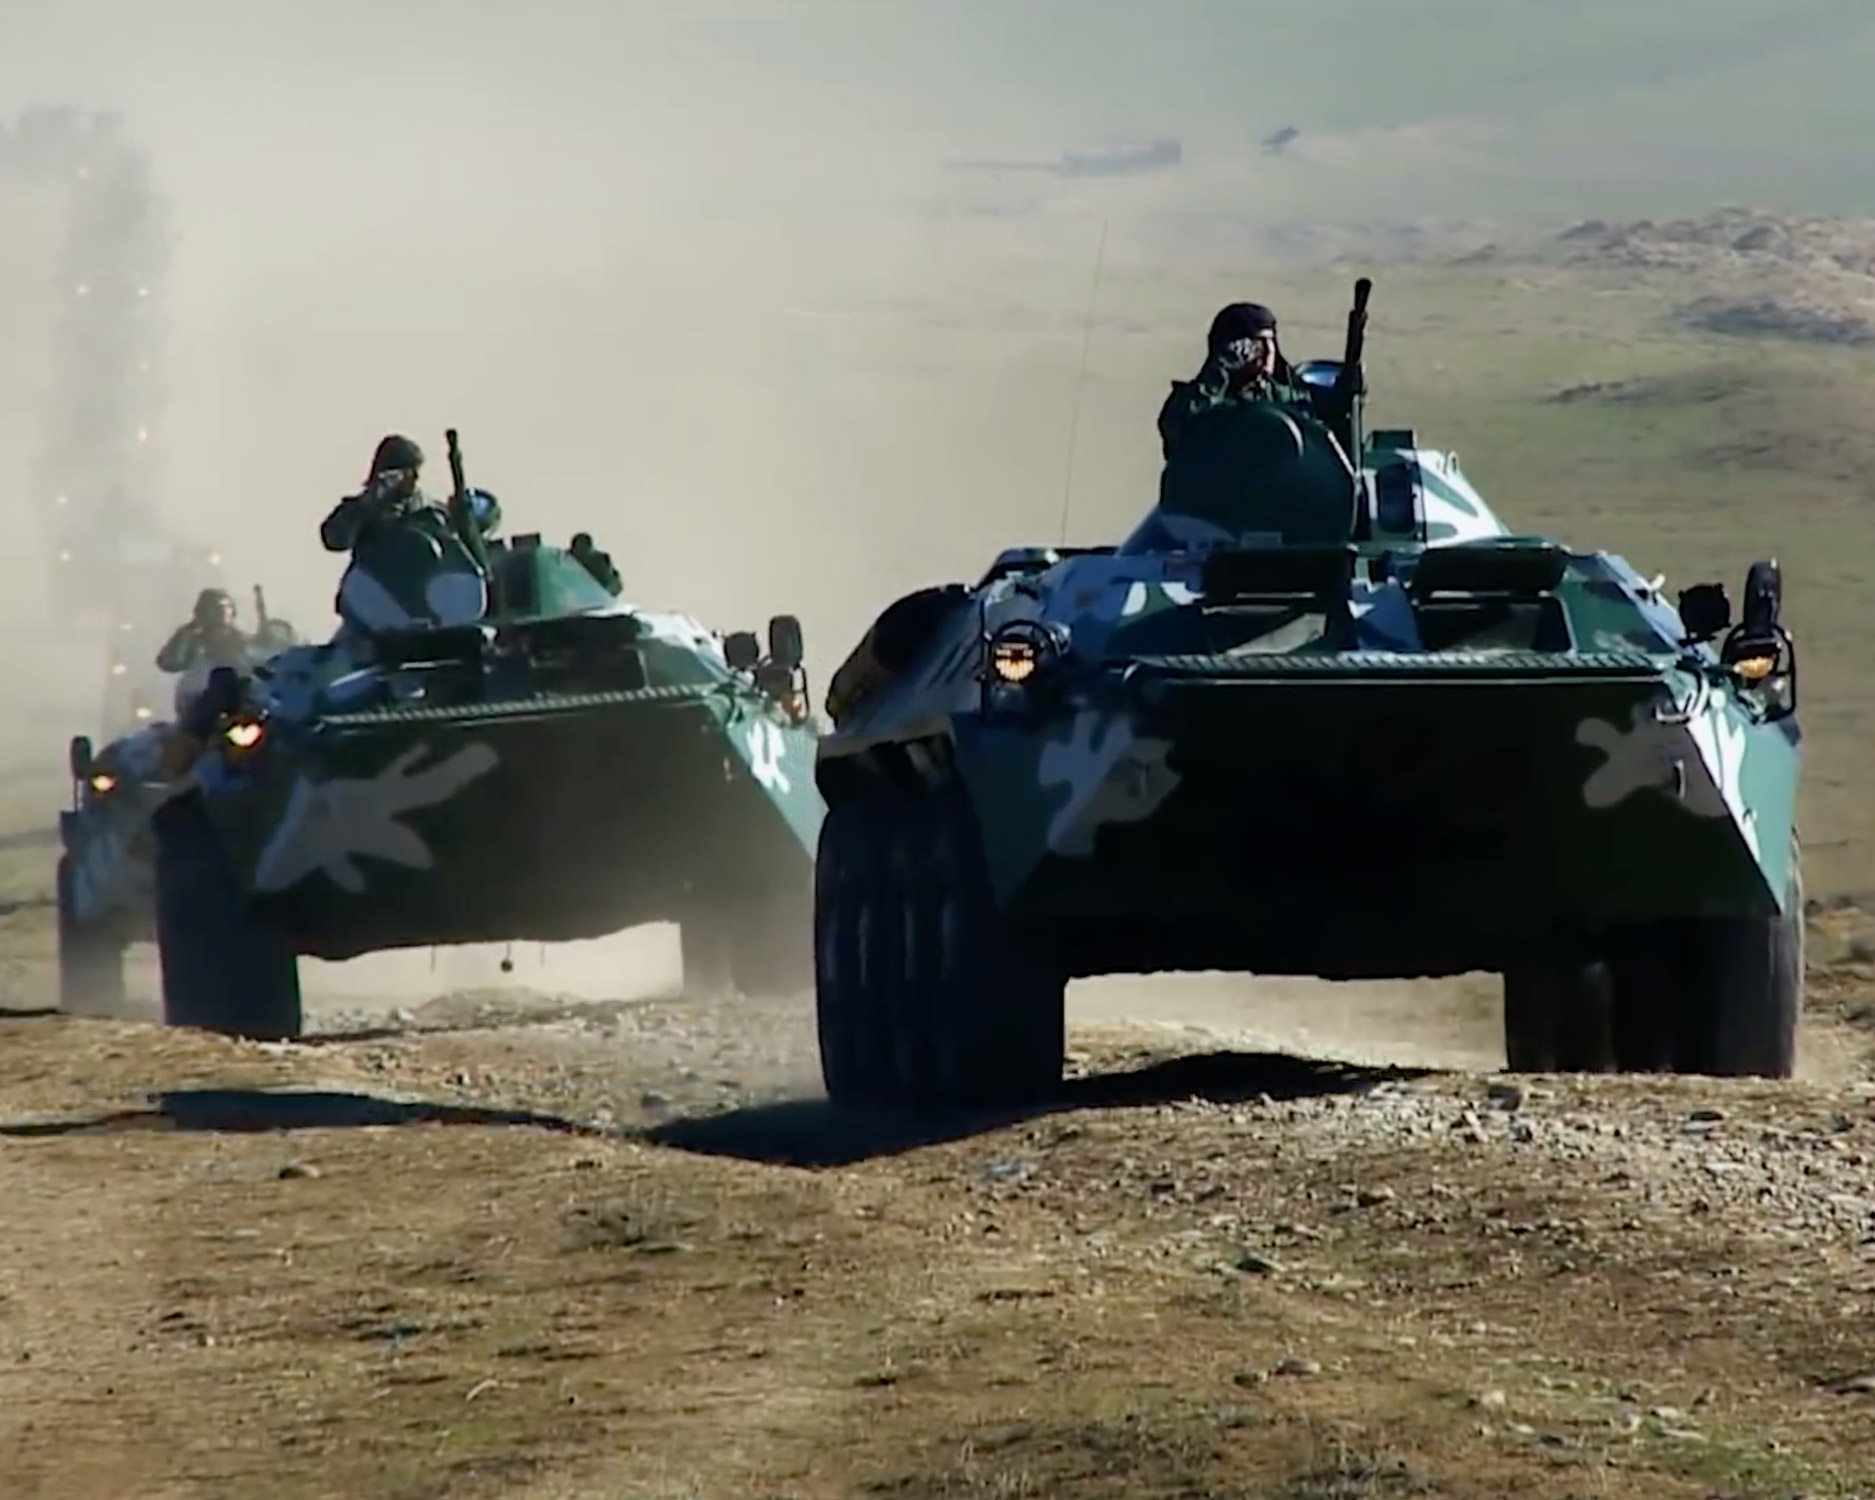 Azerbaijani BTR-70 armored personnel carriers